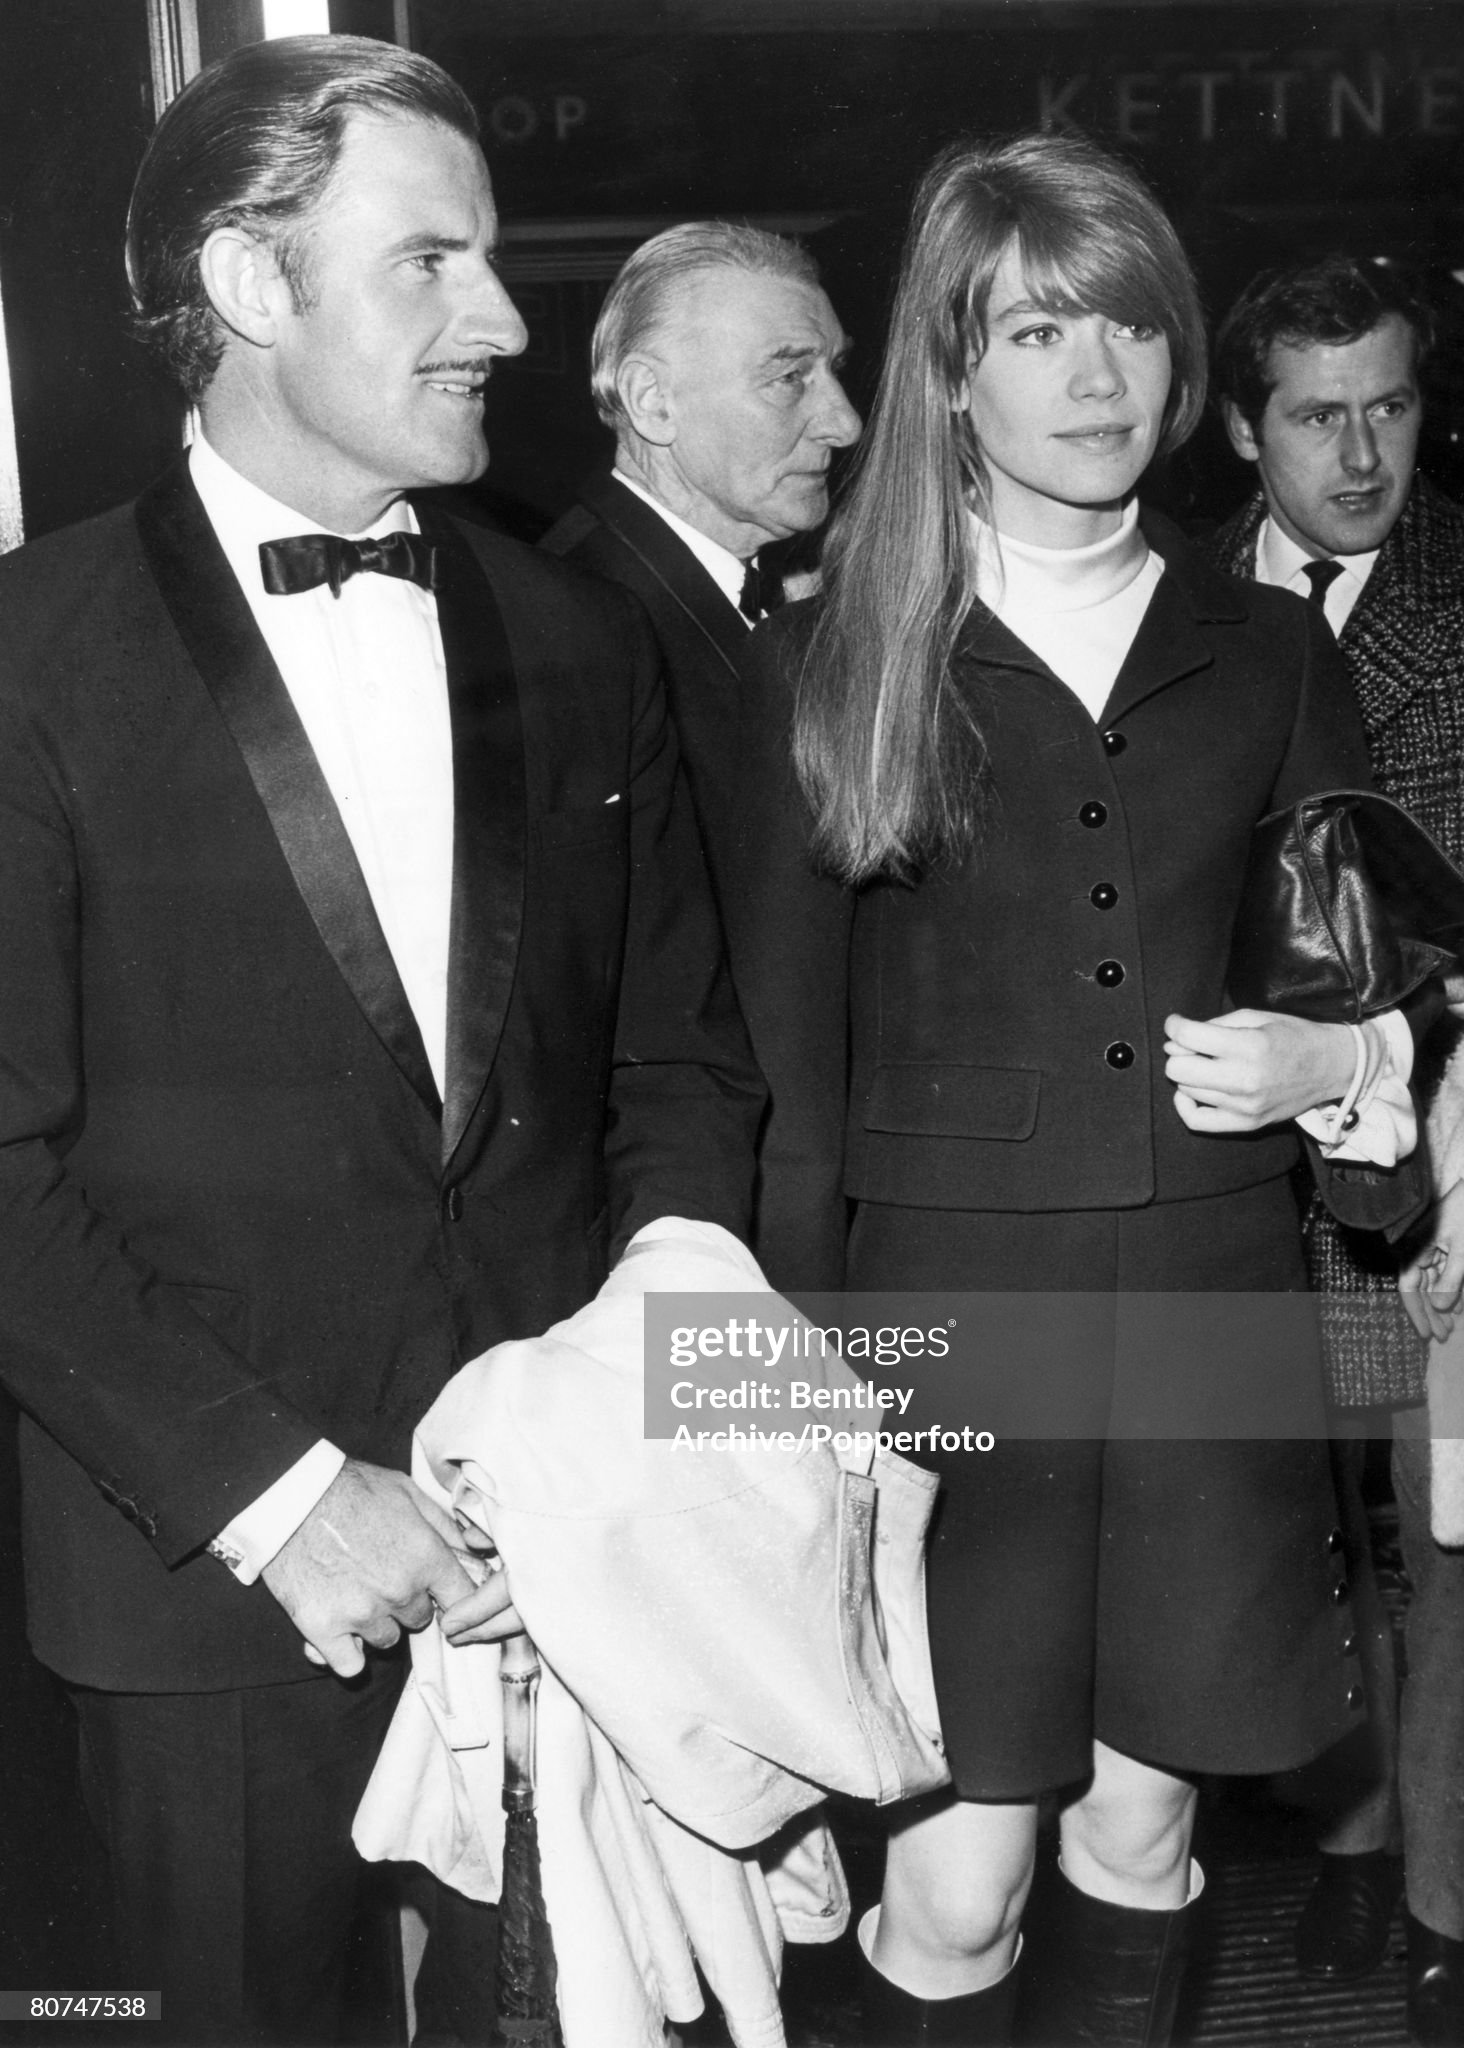 10th March 1967, London. British driver Graham Hill pictured with French actress Françoise Hardy at the premiere of the film Grand Prix in which they both appear. 